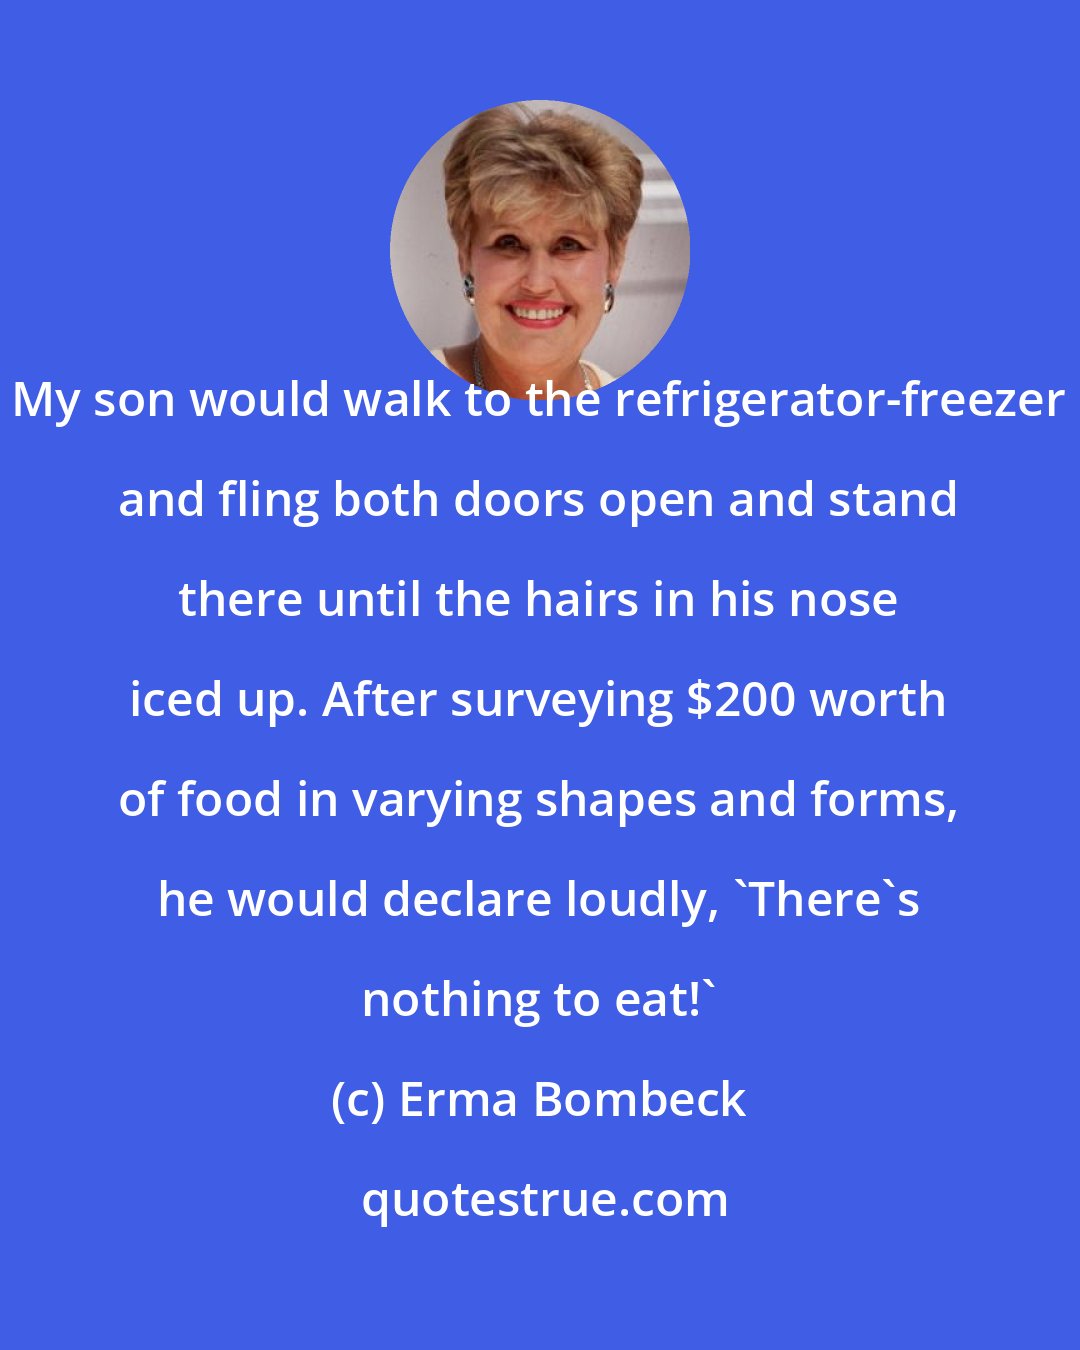 Erma Bombeck: My son would walk to the refrigerator-freezer and fling both doors open and stand there until the hairs in his nose iced up. After surveying $200 worth of food in varying shapes and forms, he would declare loudly, 'There's nothing to eat!'